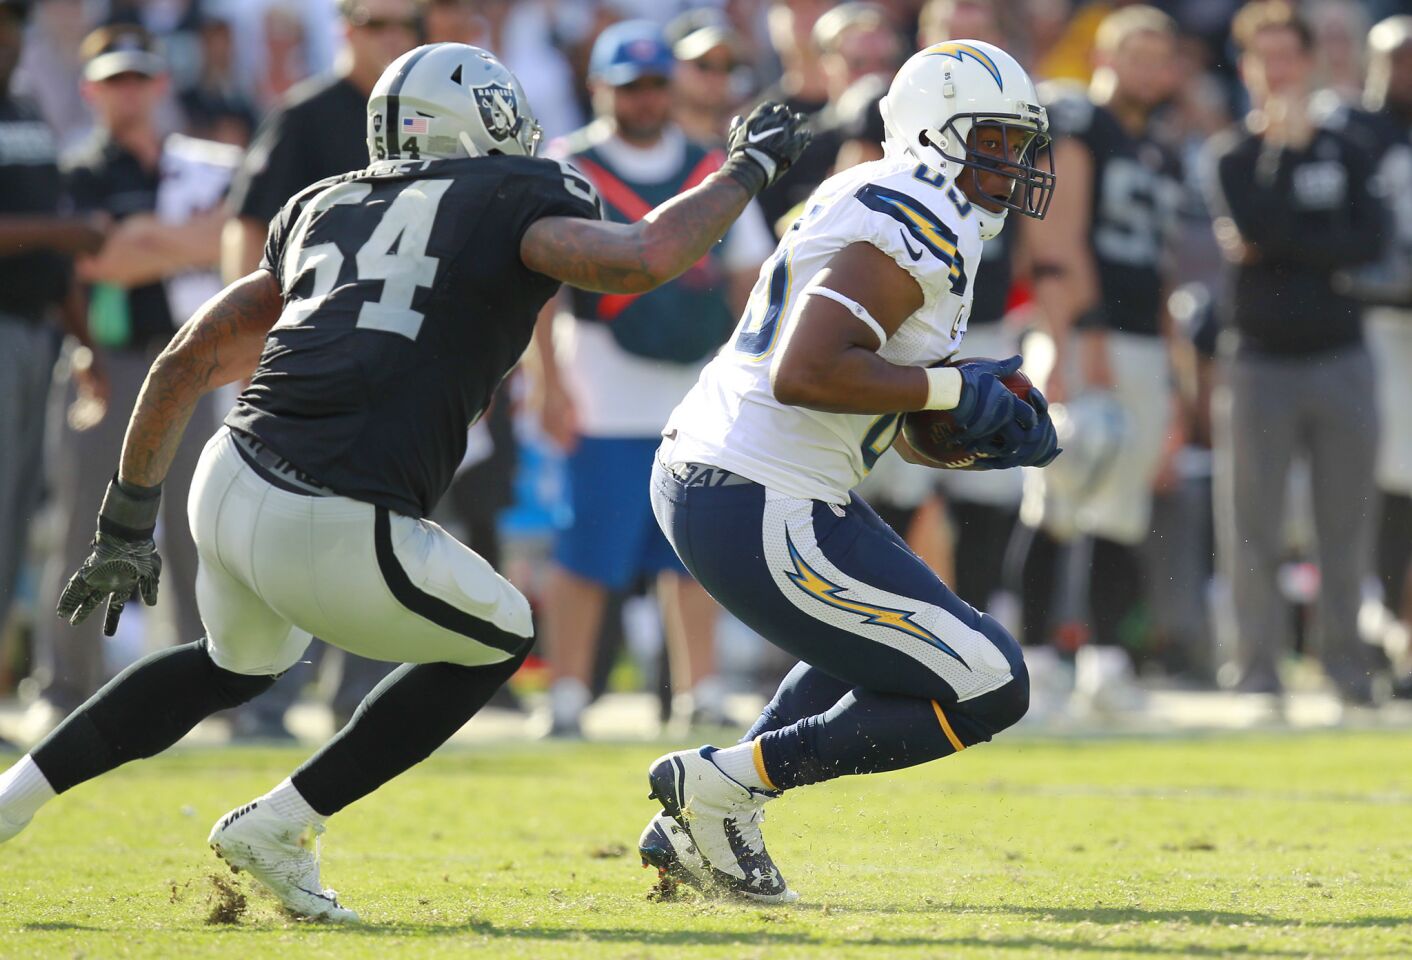 San Diego Chargers Antonio Gates gets a first down by Raiders Perry Riley Jr. in the 4th quarter in Oakland on Oct. 9, 2016. (Photo by K.C. Alfred/The San Diego Union-Tribune)